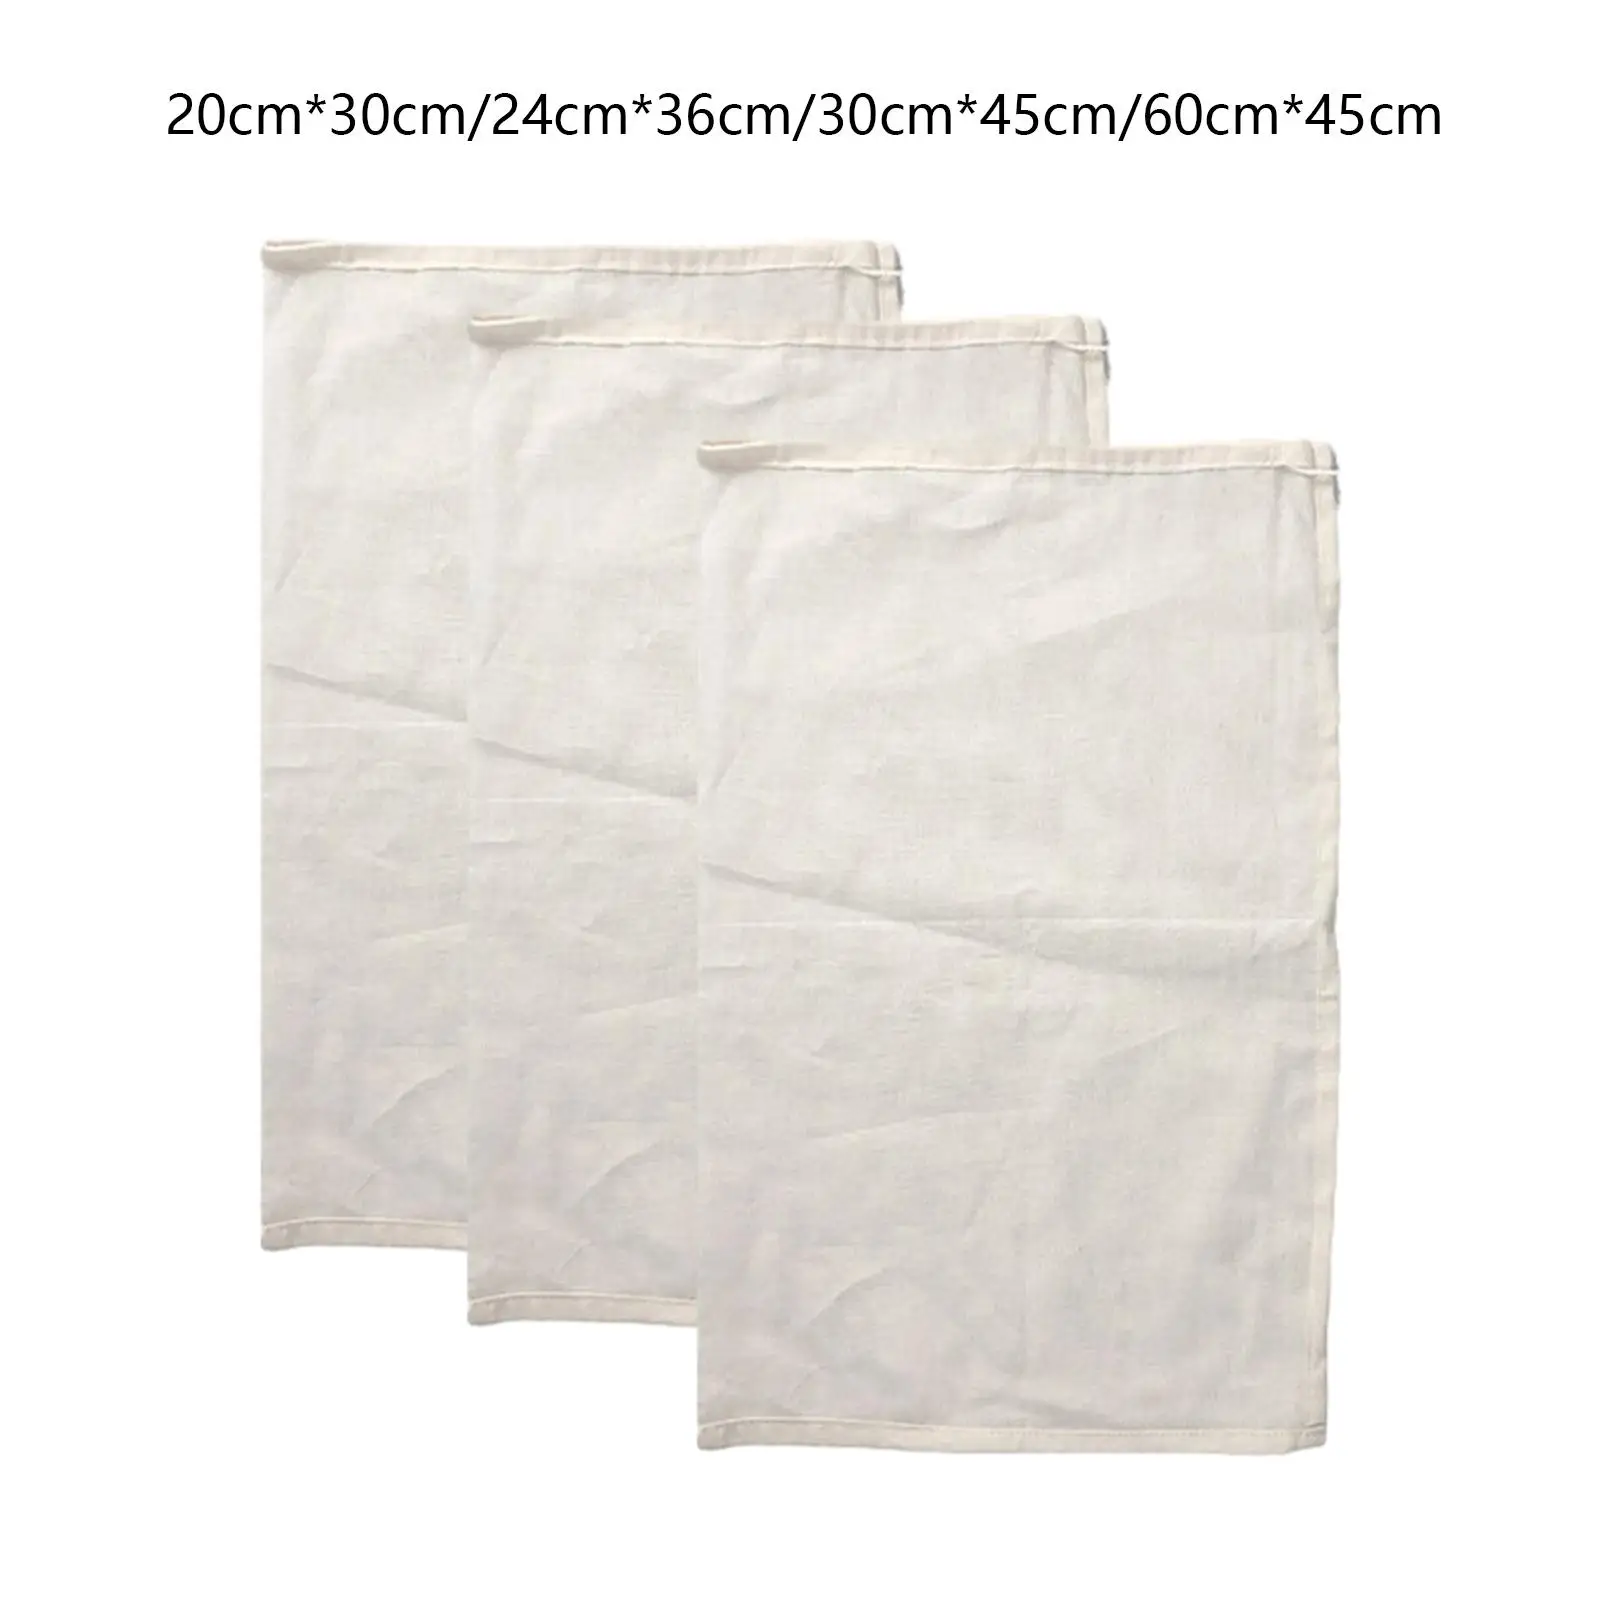 3 Pieces Nut Milk Bag Reusable Fine Mesh Portable Soup Bag Cheesecloth Bags for Spice Food Soy Milk Vegetables Coffee